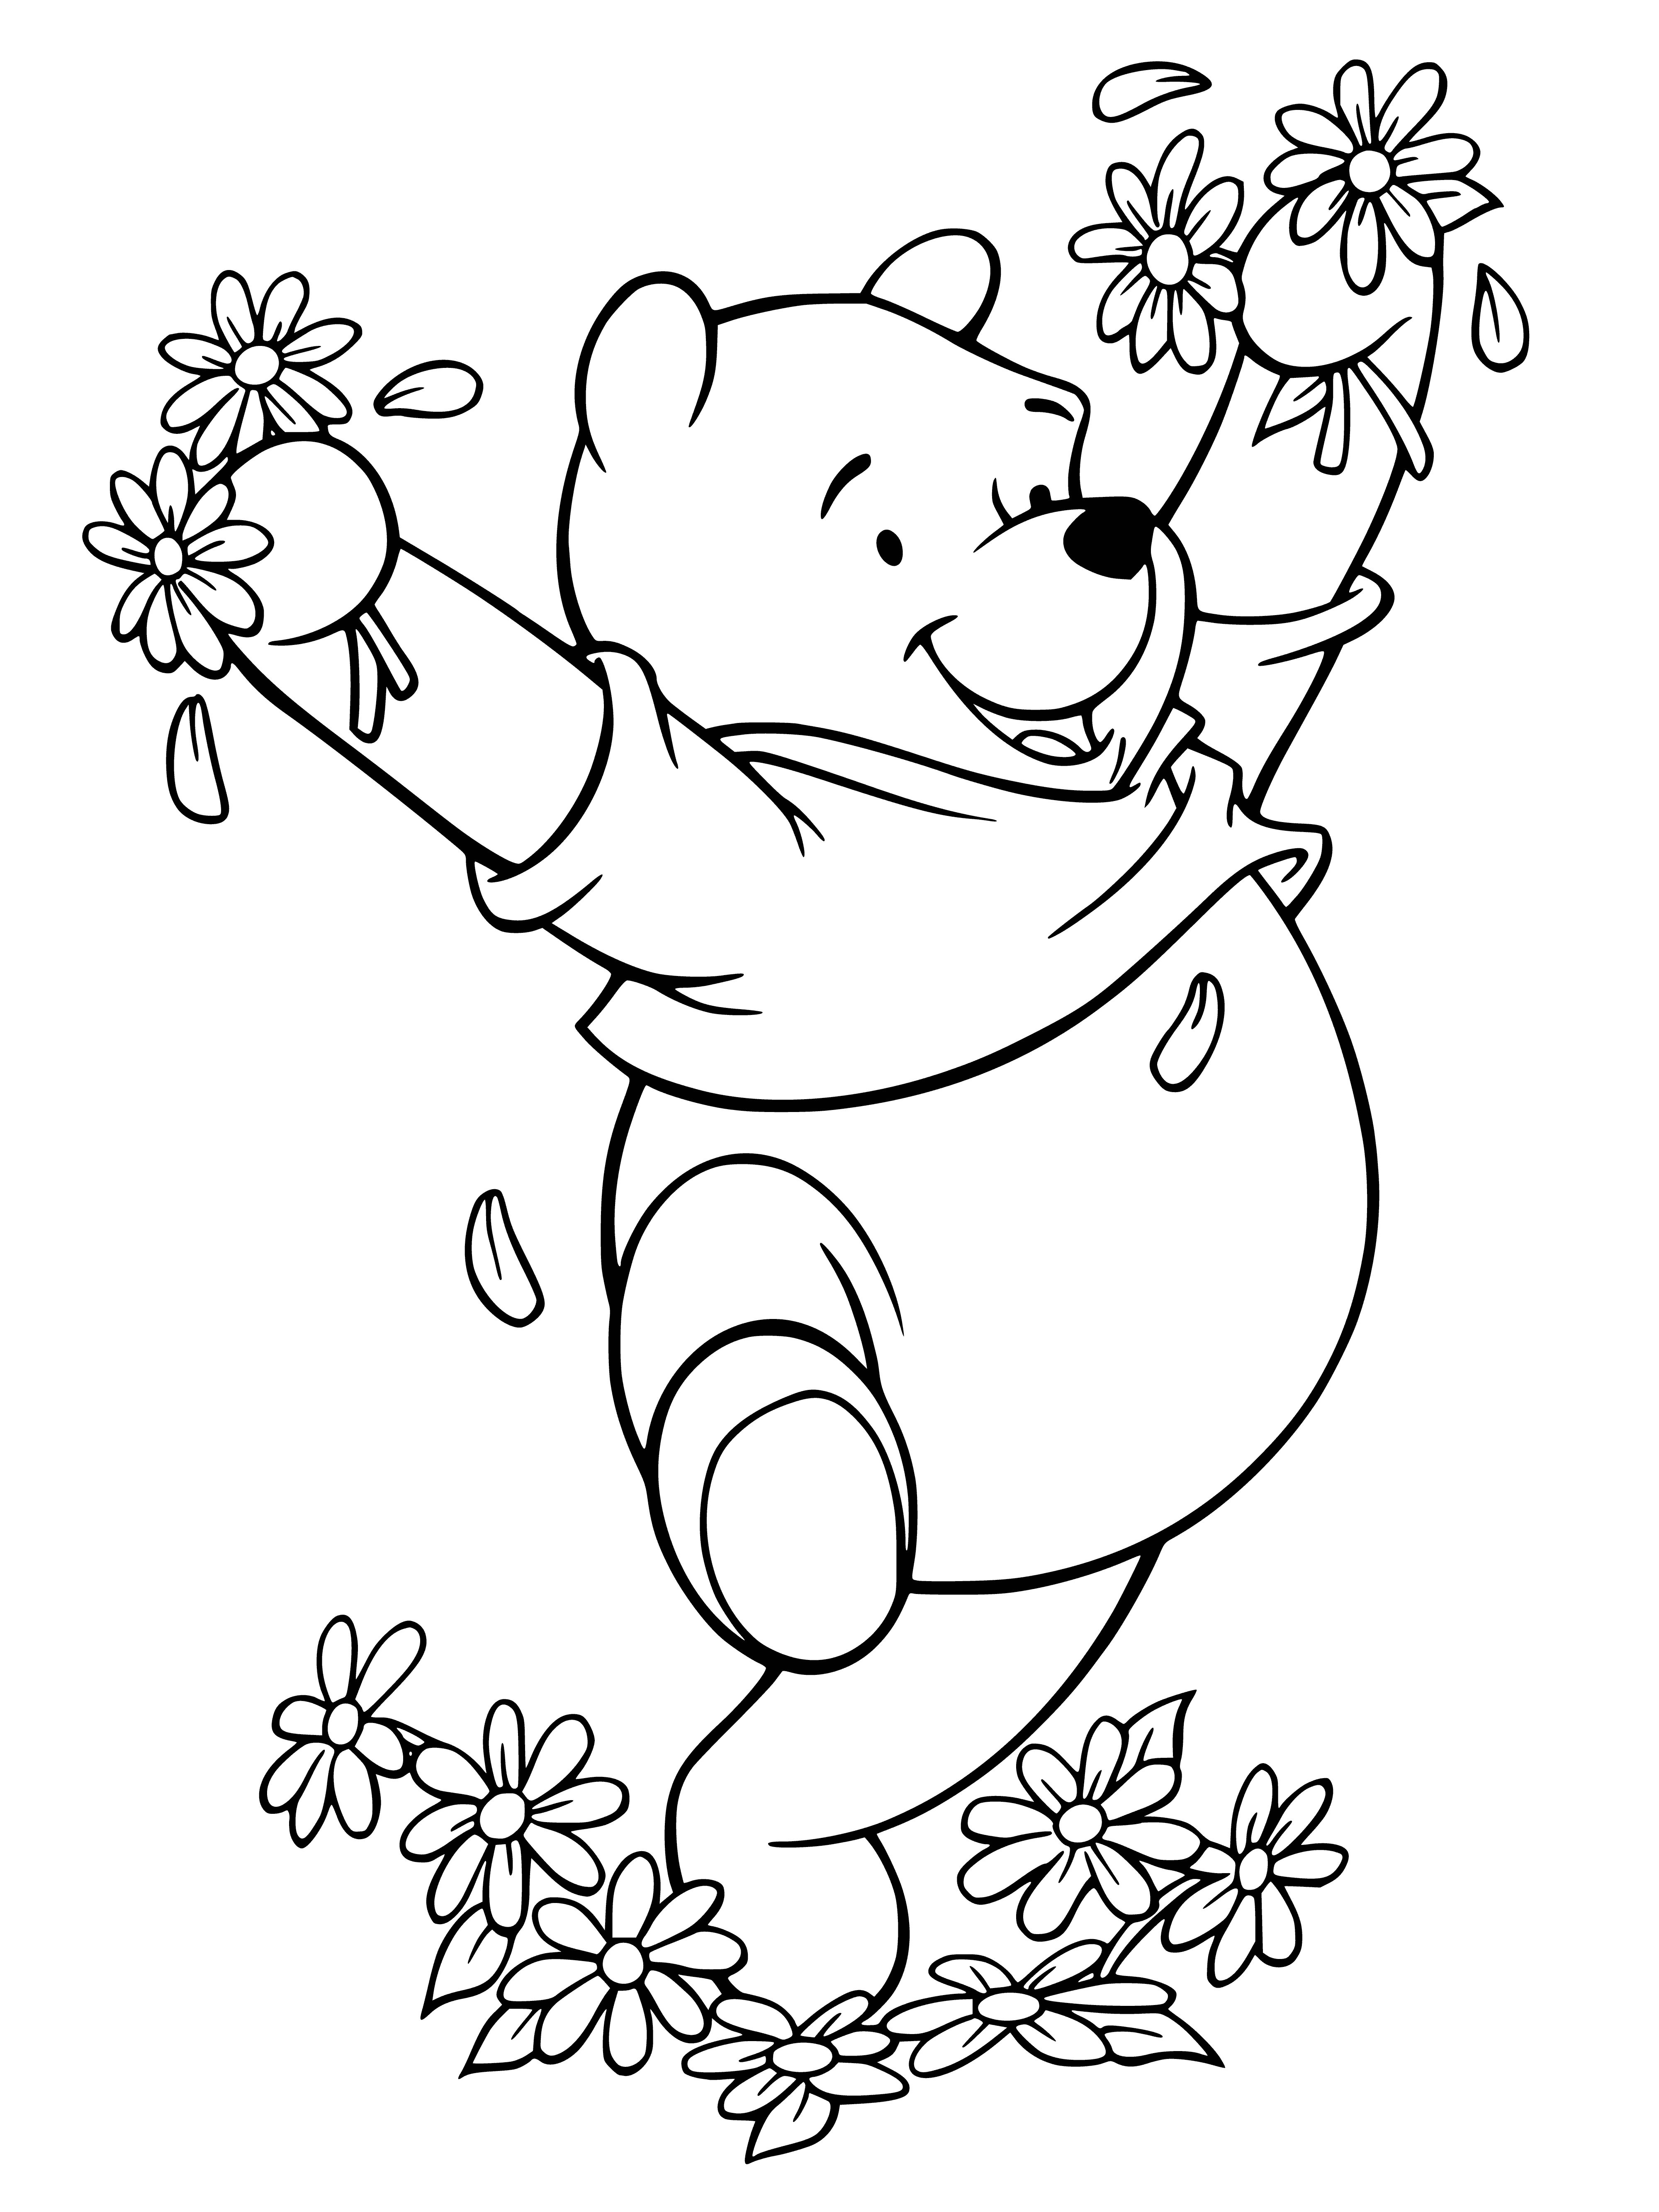 coloring page: Winnie and friends fly a blue kite with a yellow string, joyfully enjoying the day.